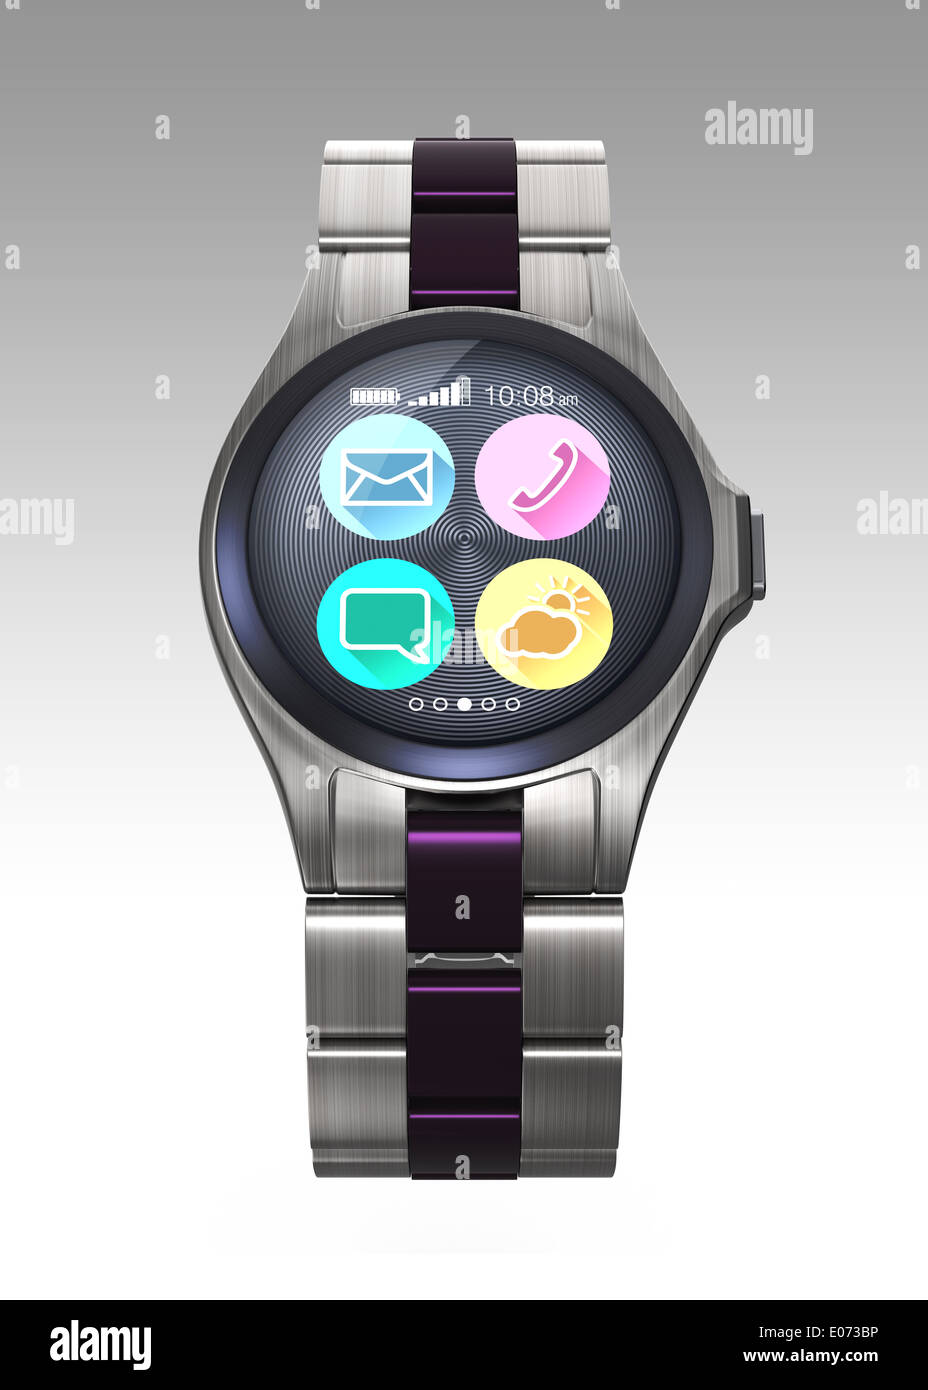 Luxury smart watch with touch screen. Isolated on gray background. Stock Photo